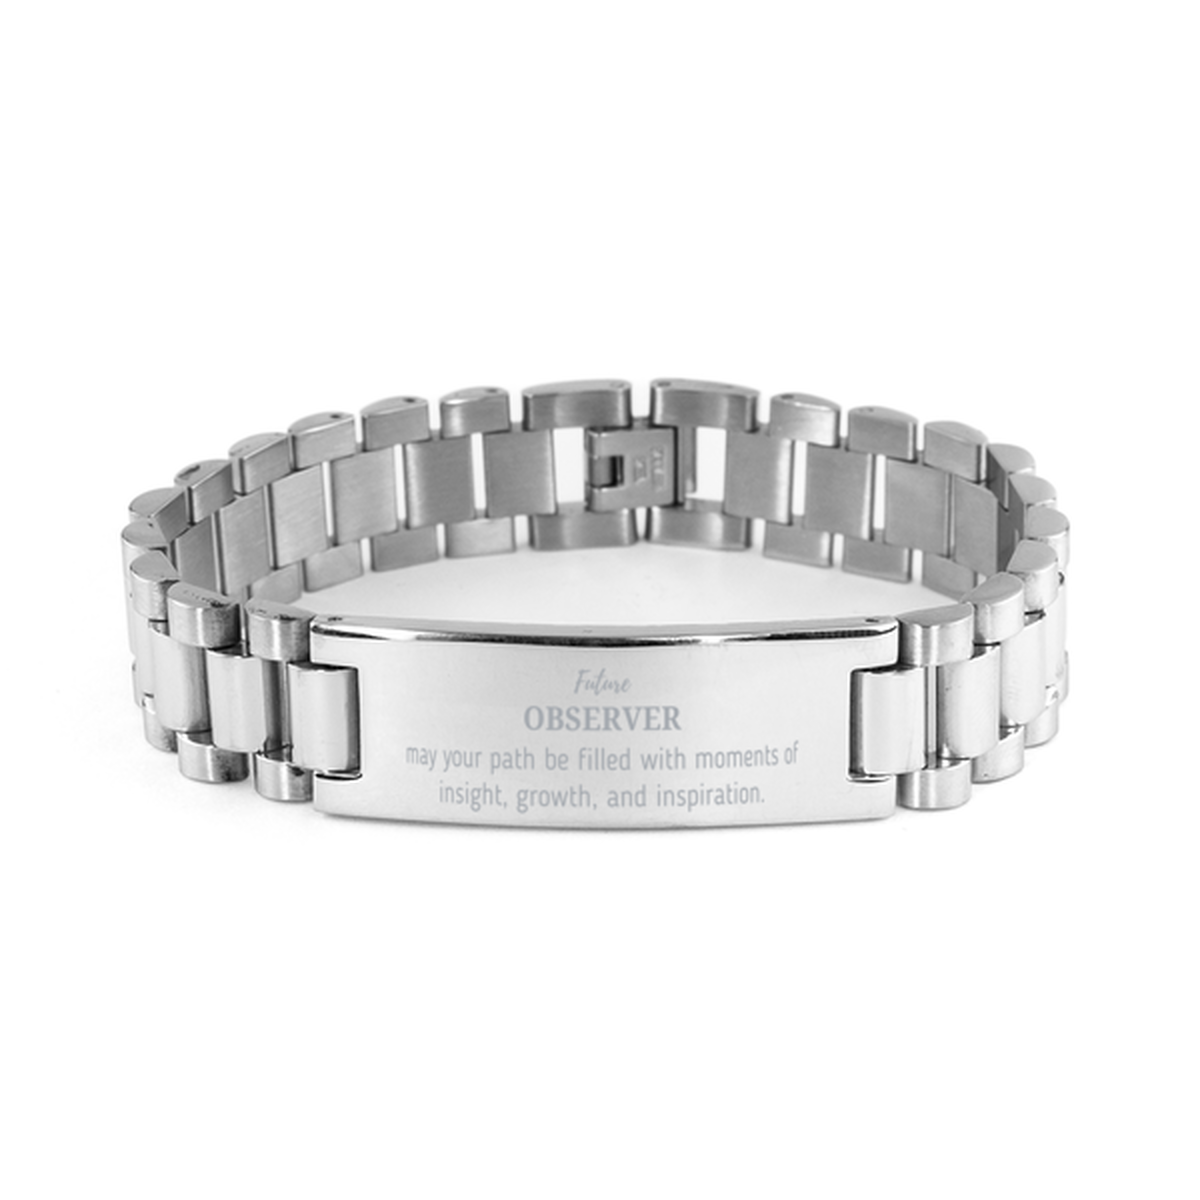 Future Observer Gifts, May your path be filled with moments of insight, Graduation Gifts for New Observer, Christmas Unique Ladder Stainless Steel Bracelet For Men, Women, Friends